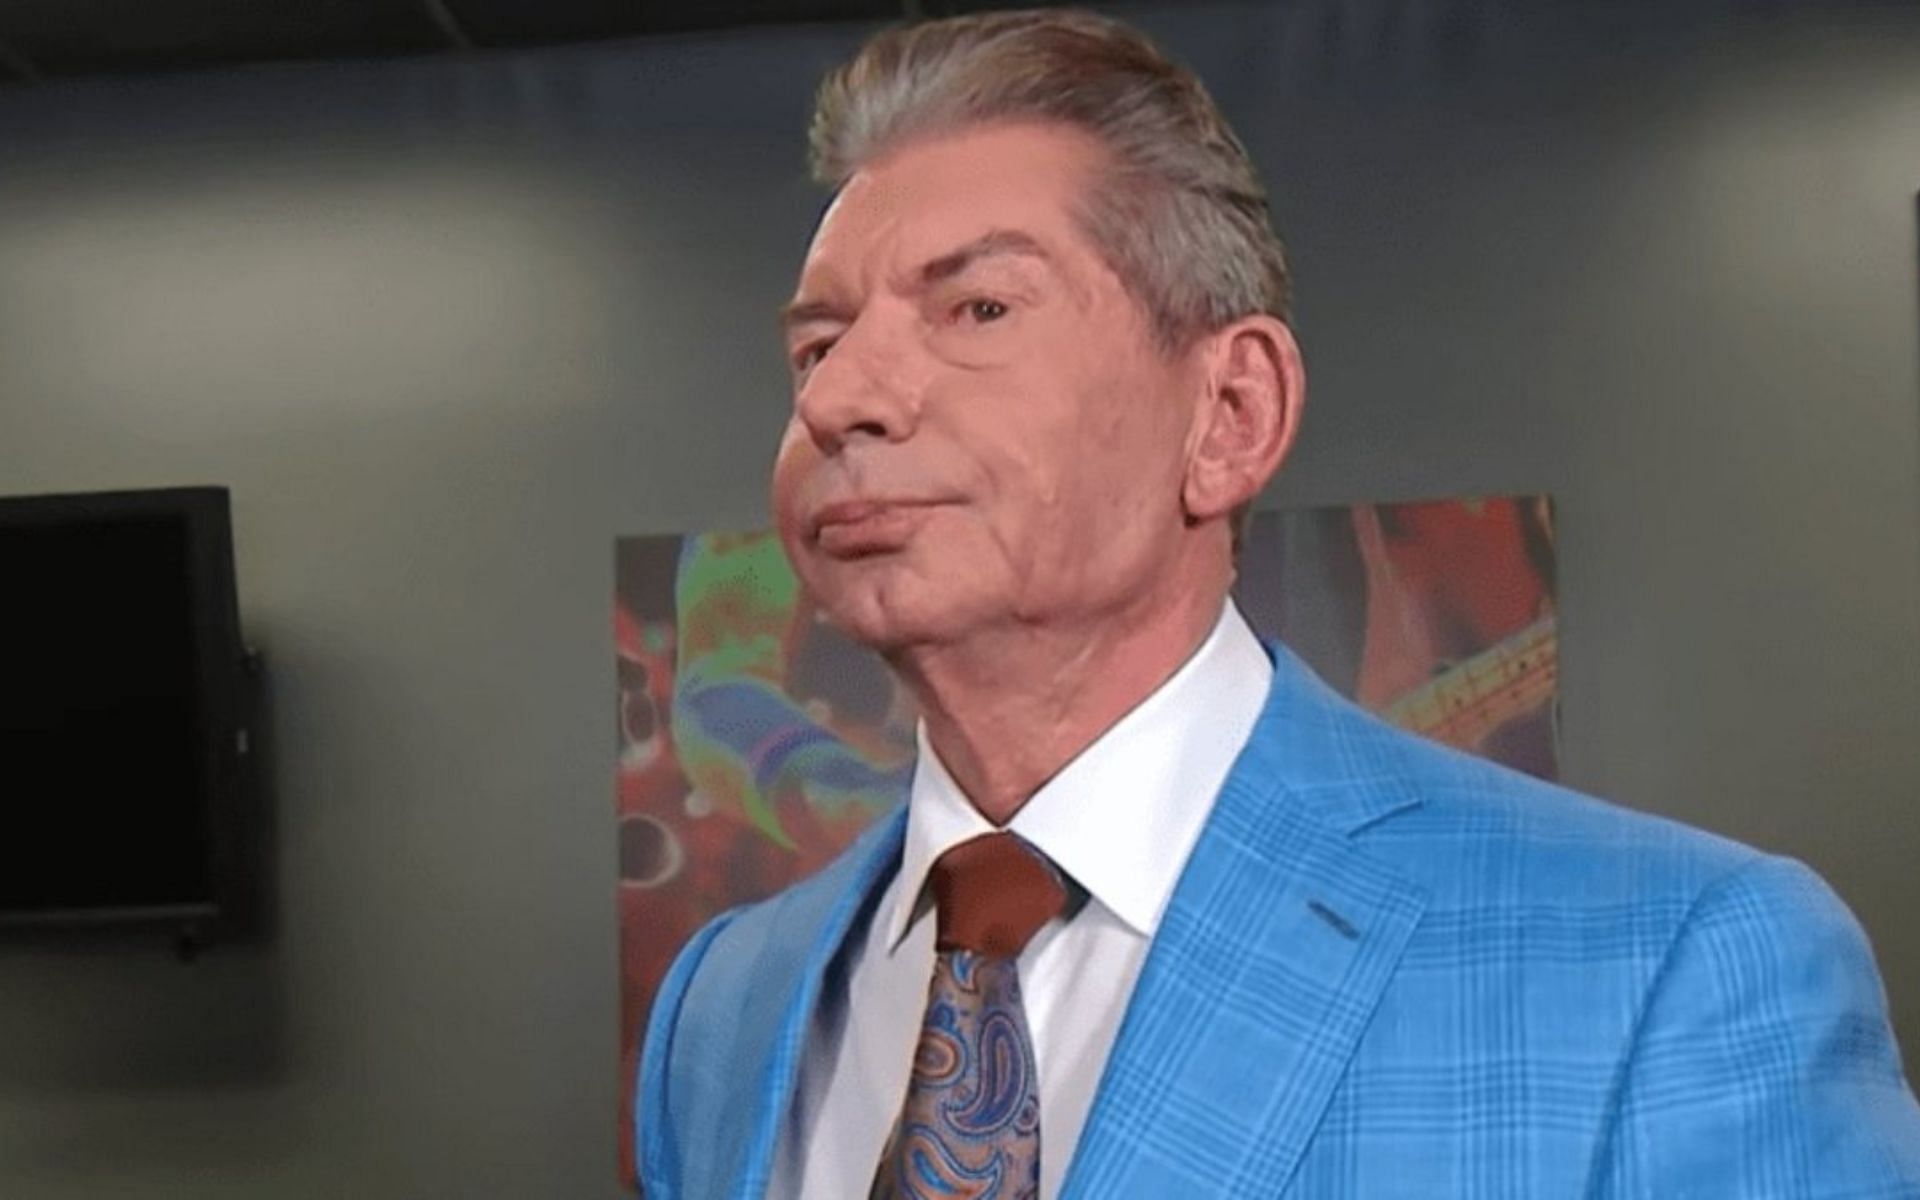 Vince McMahon retired from the WWE last Friday